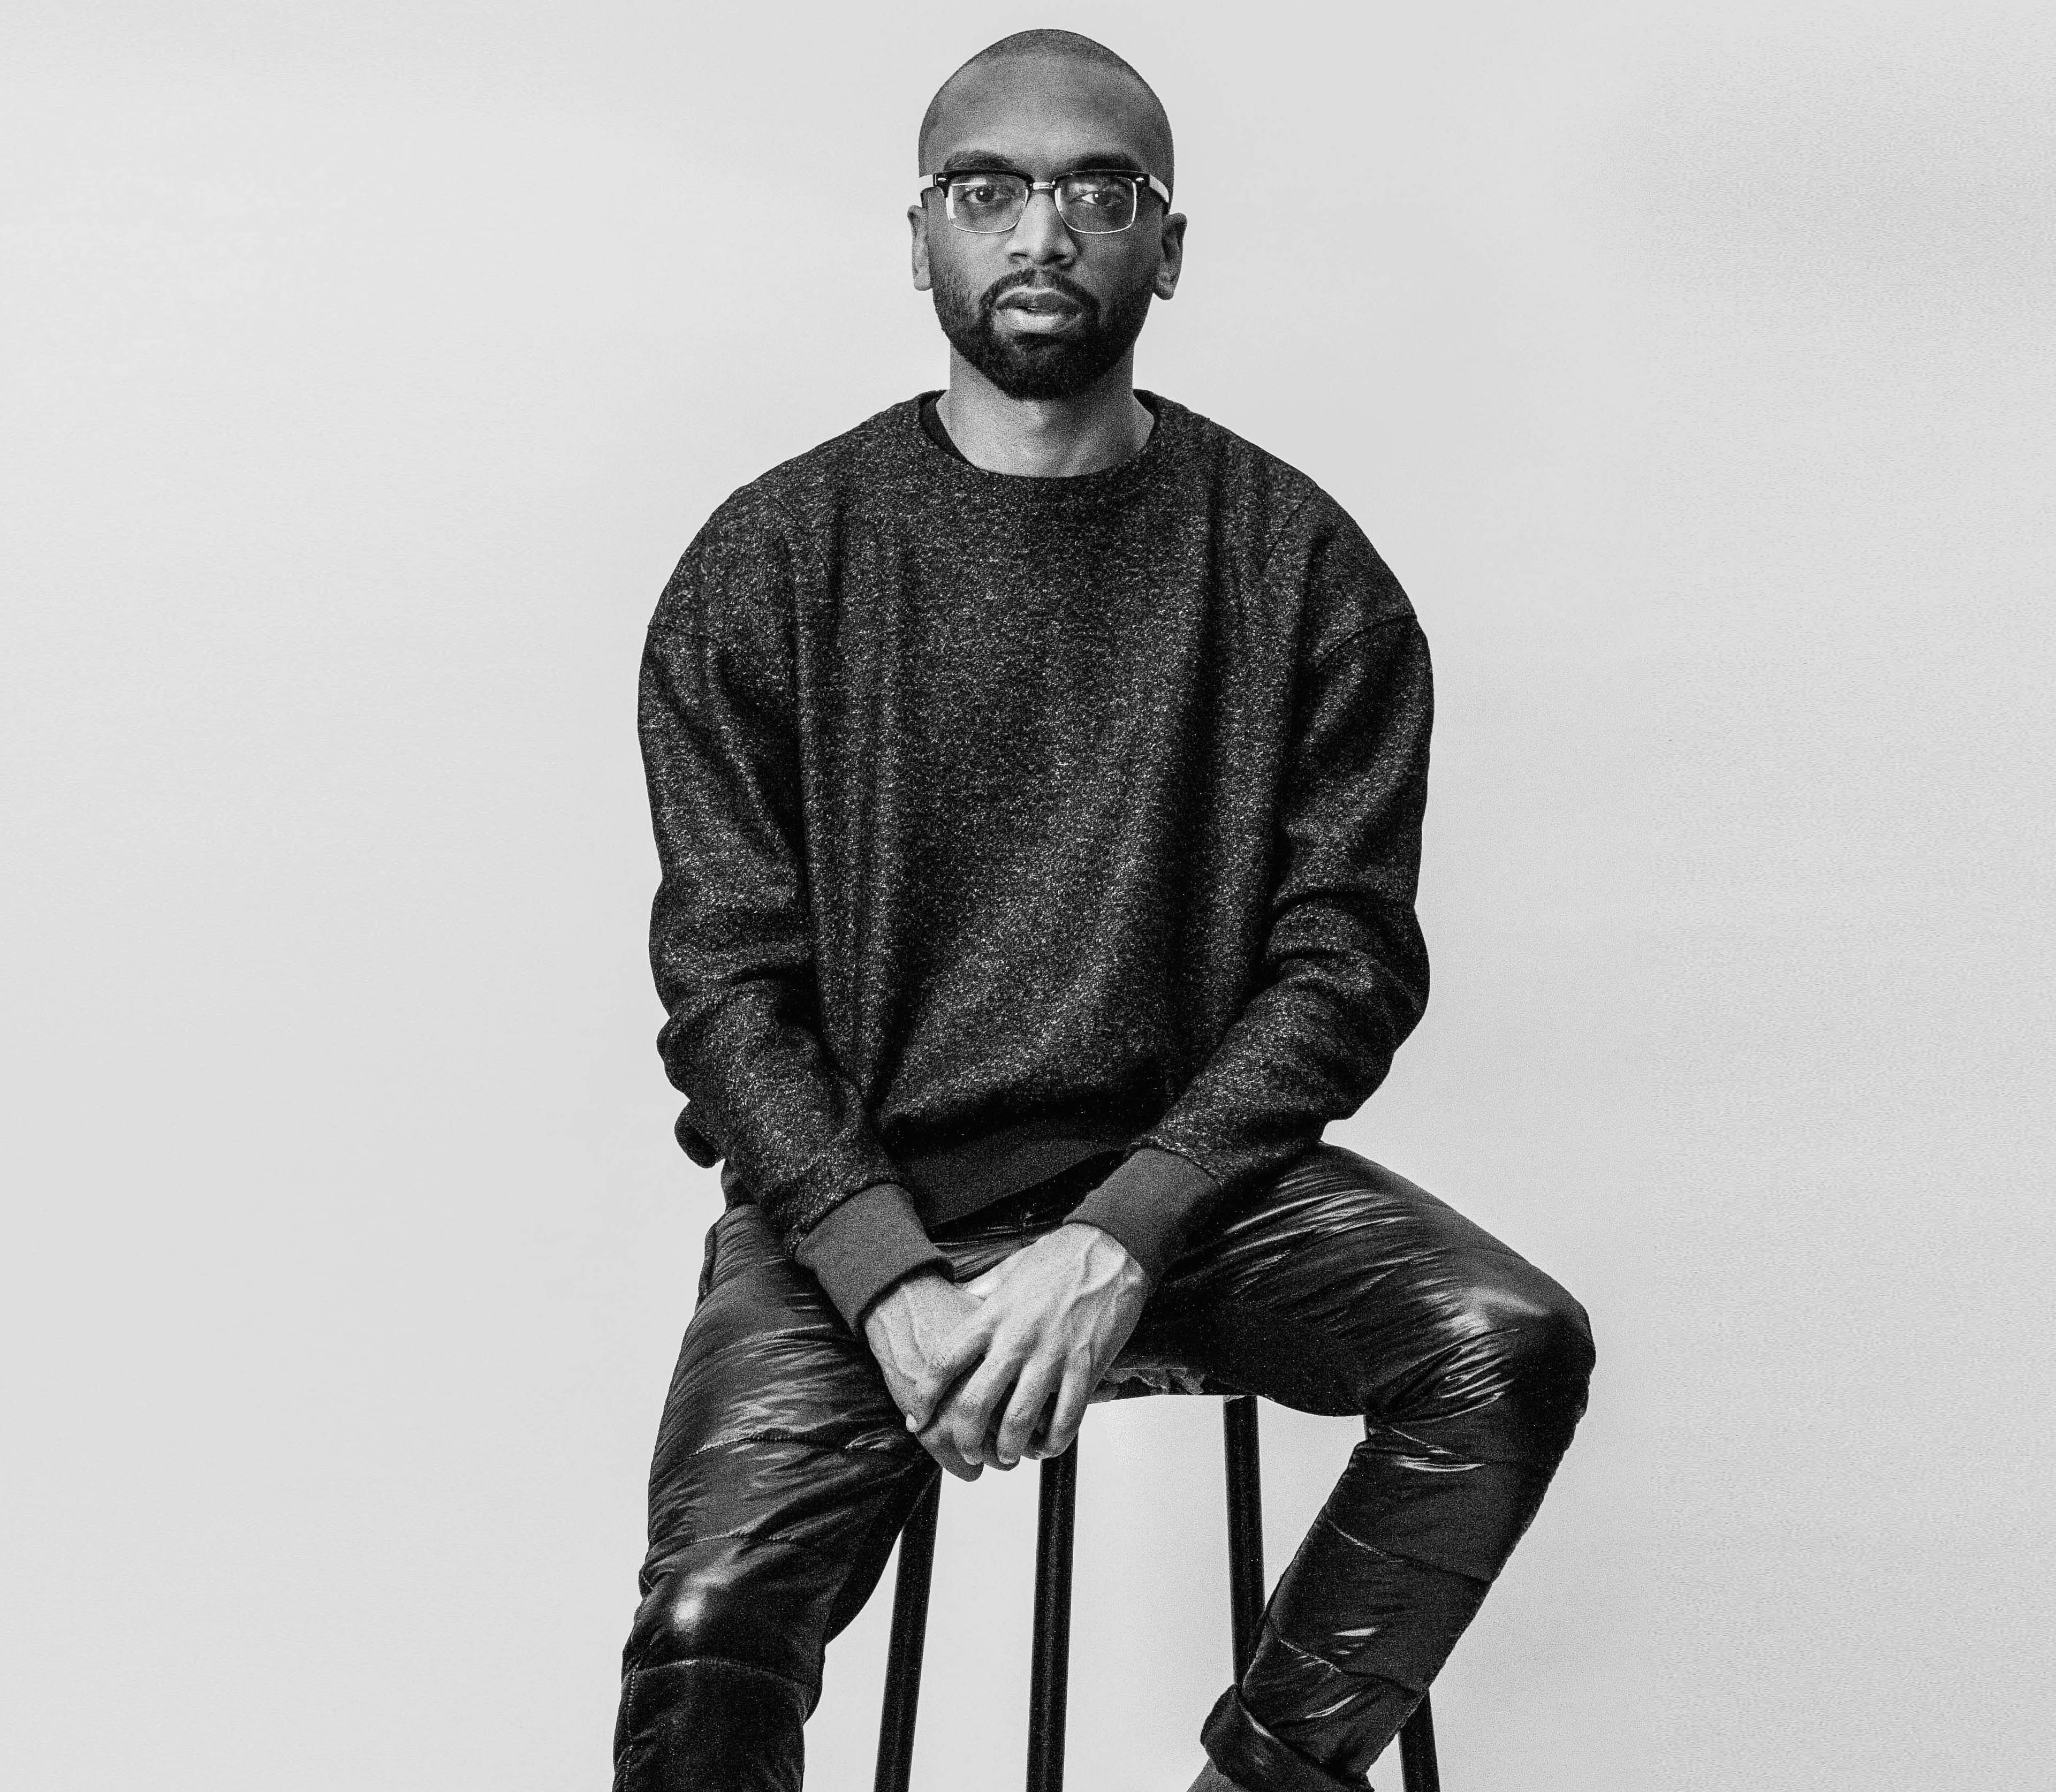 Canada Goose Taps Kerby Jean-Raymond of Pyer Moss for New